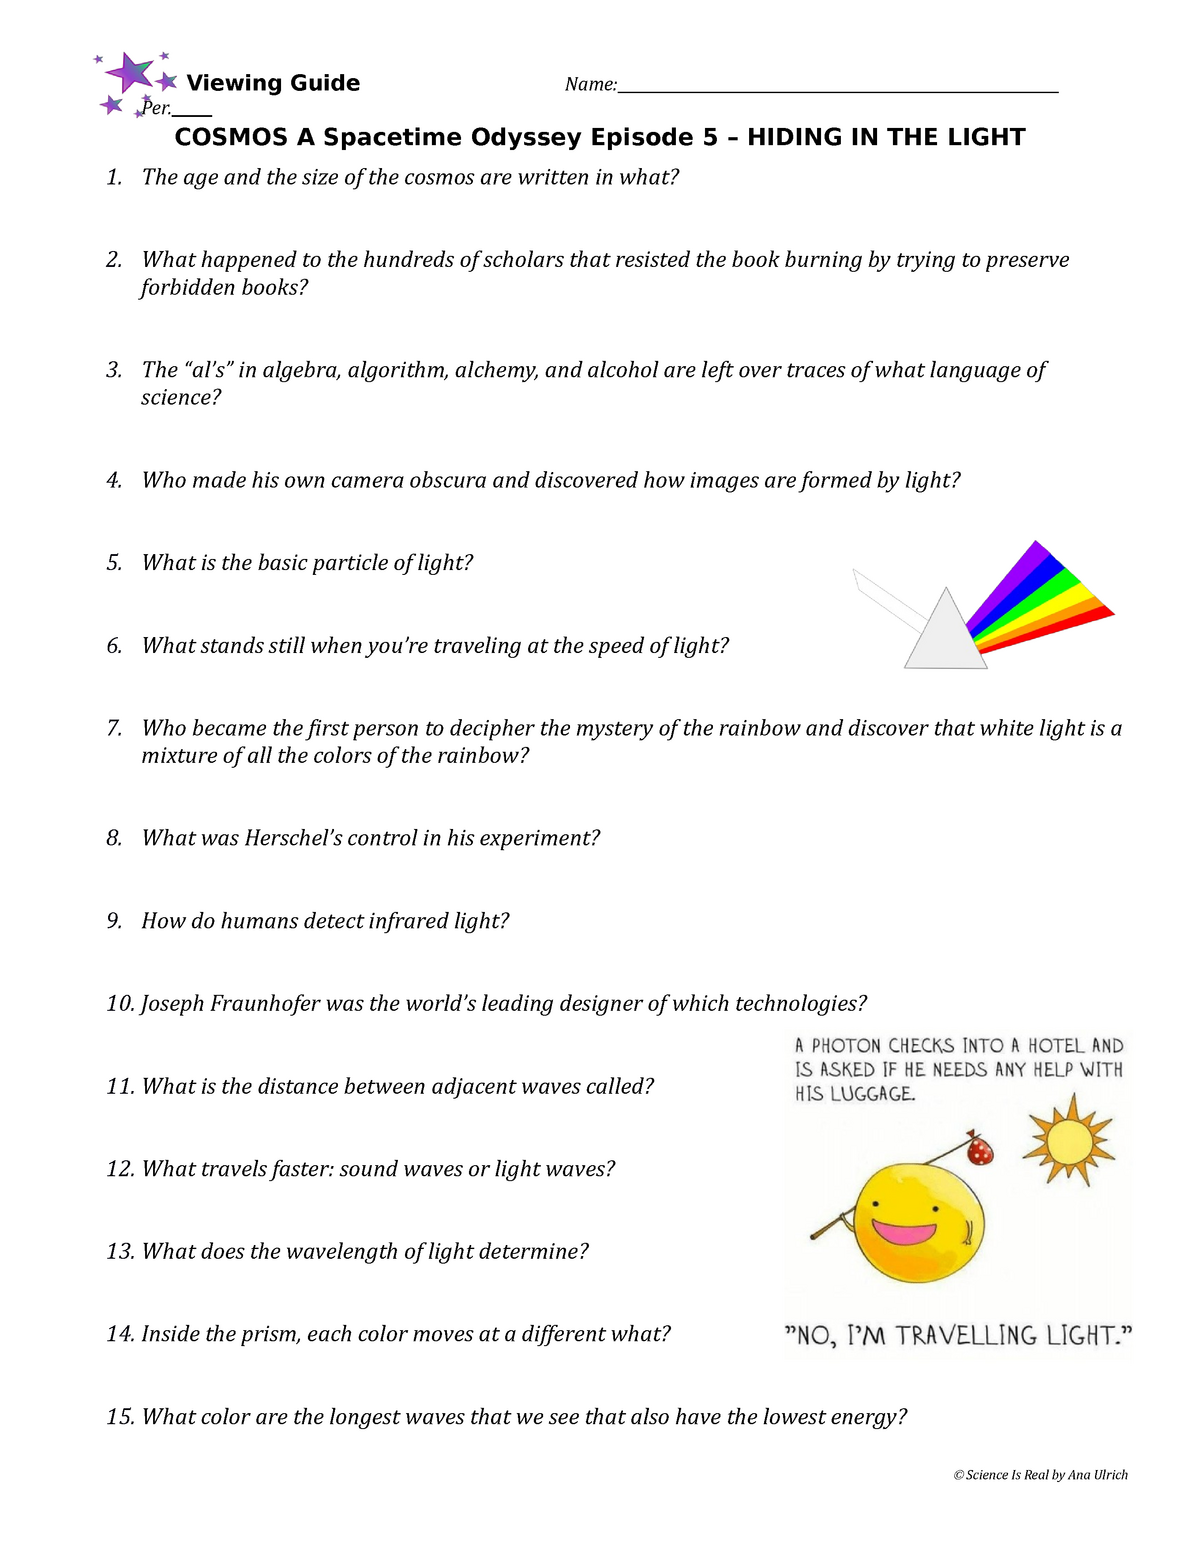 Student Handout Cosmos Episode 22 - Hiding In The Light-22 - Viewing With Cosmos Episode 1 Worksheet Answers